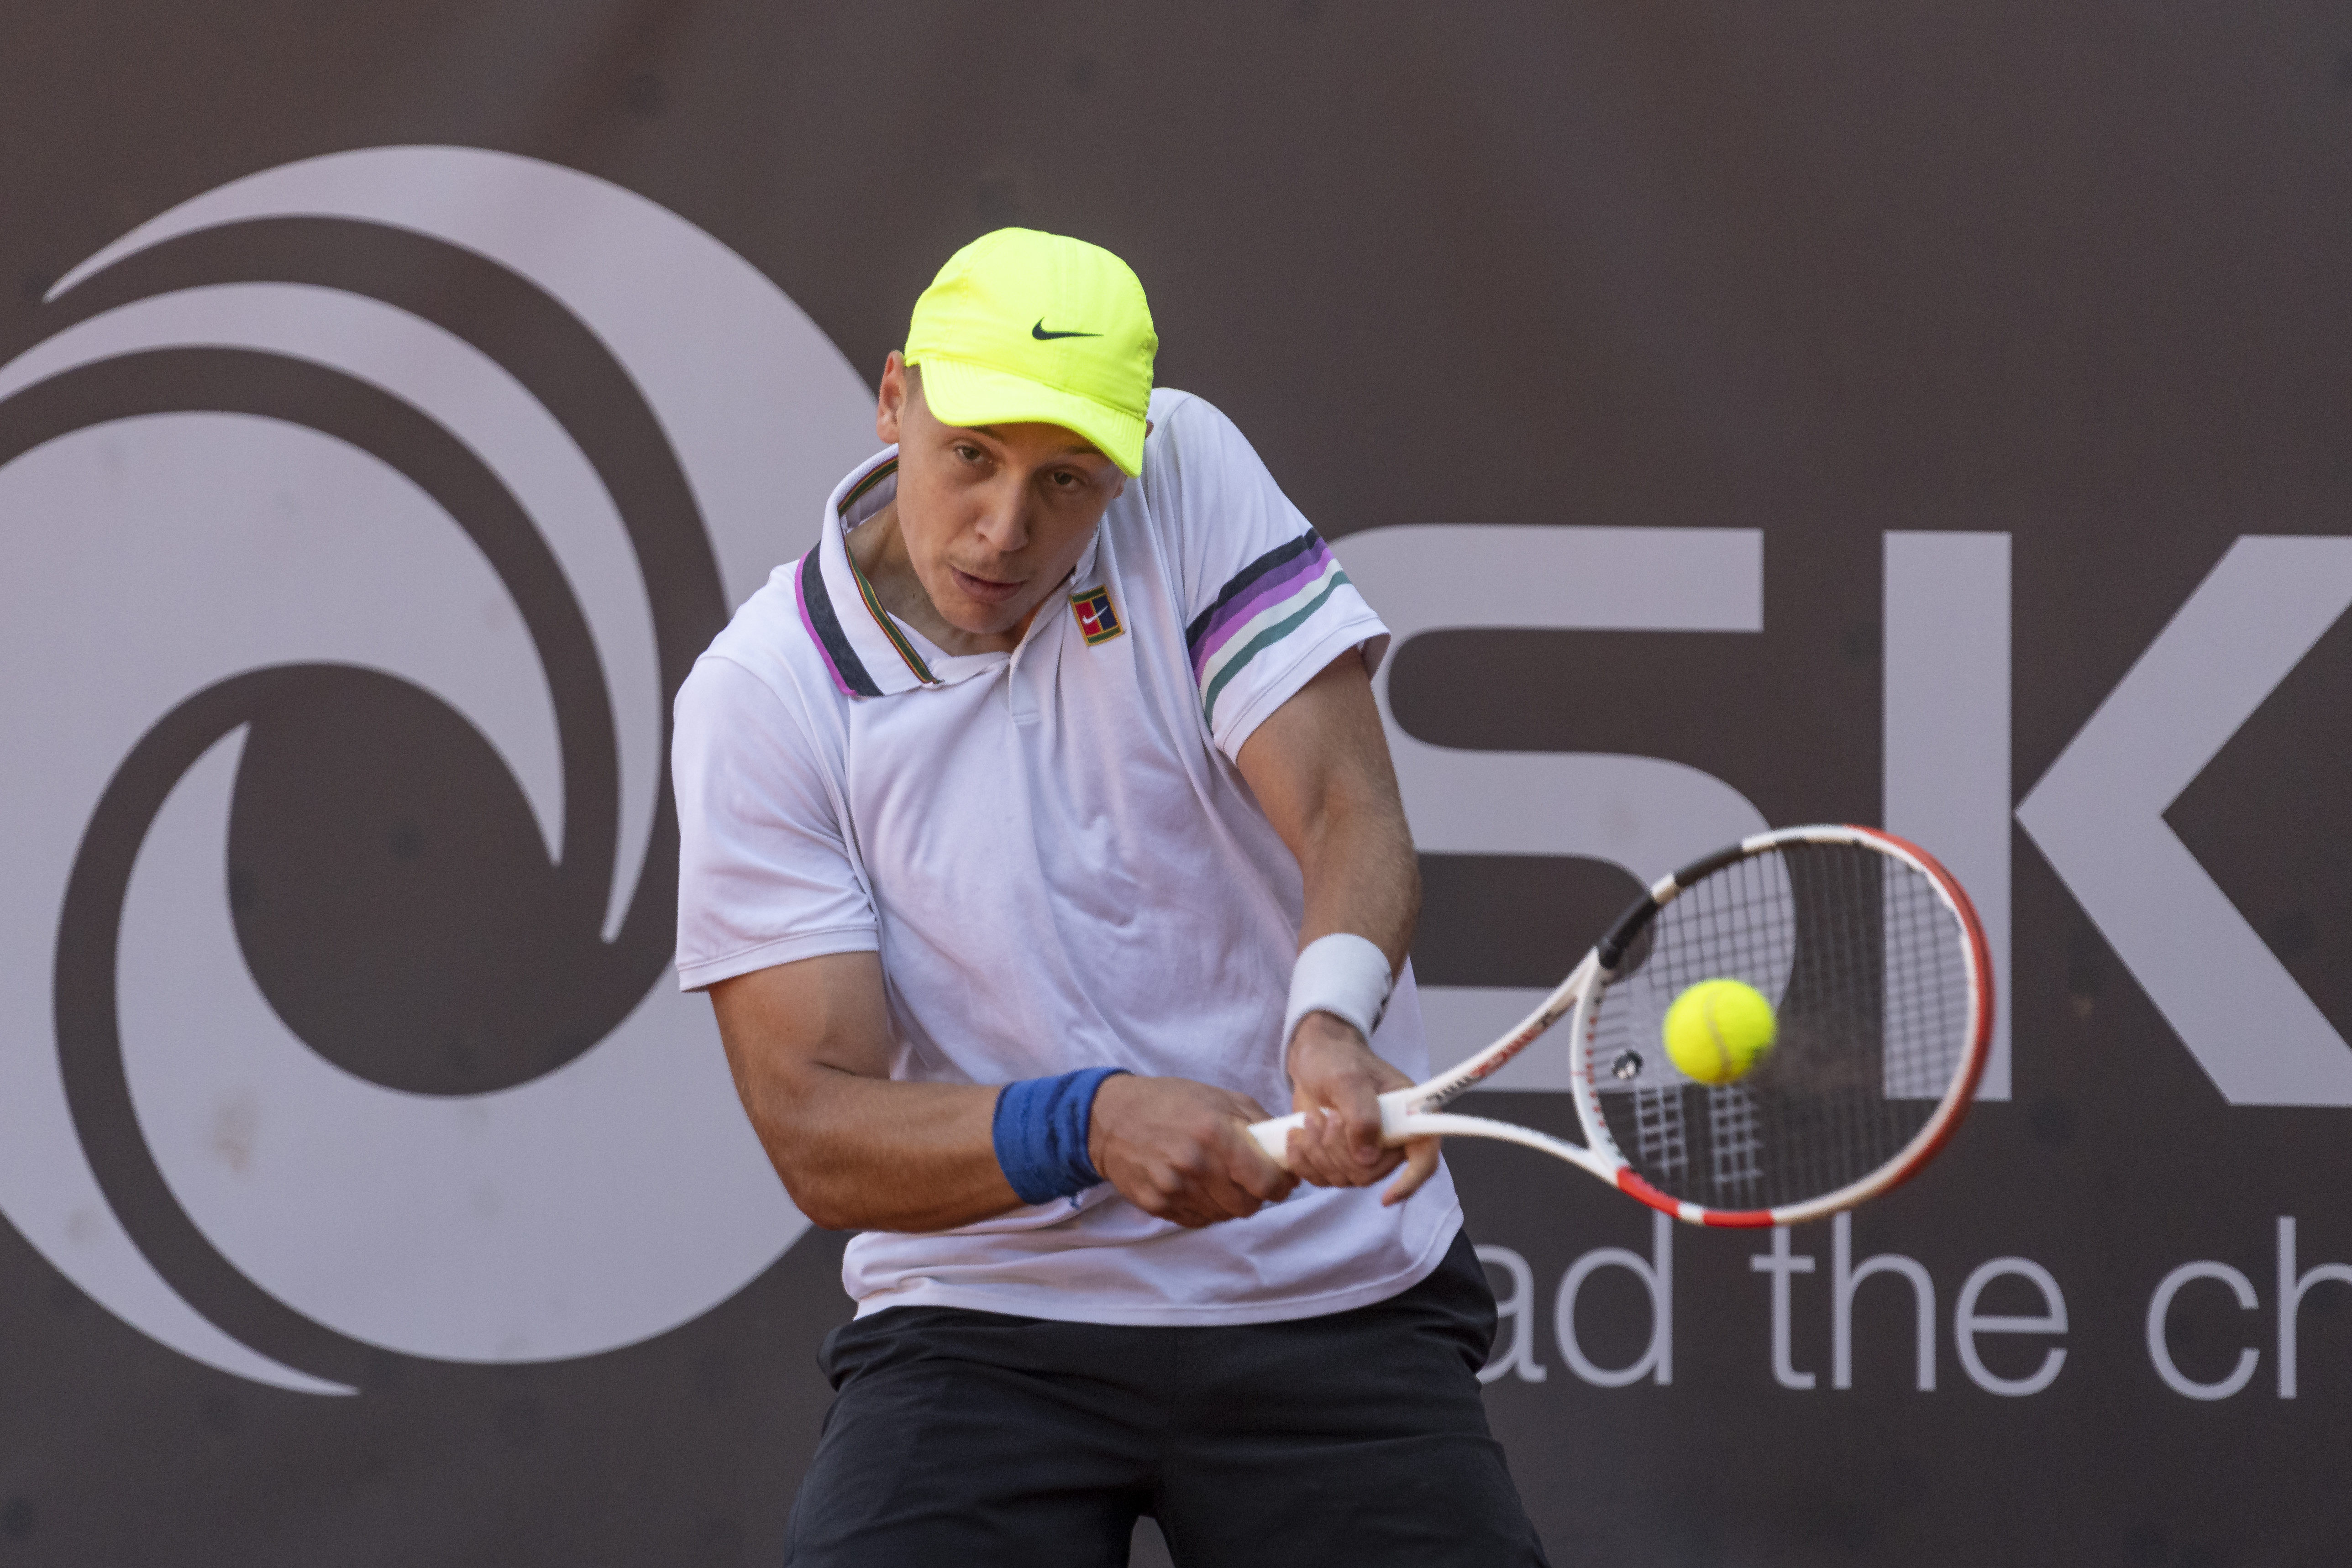 In Gstaad, Hamad Medjedovic gets the better of Dominic Thiem again